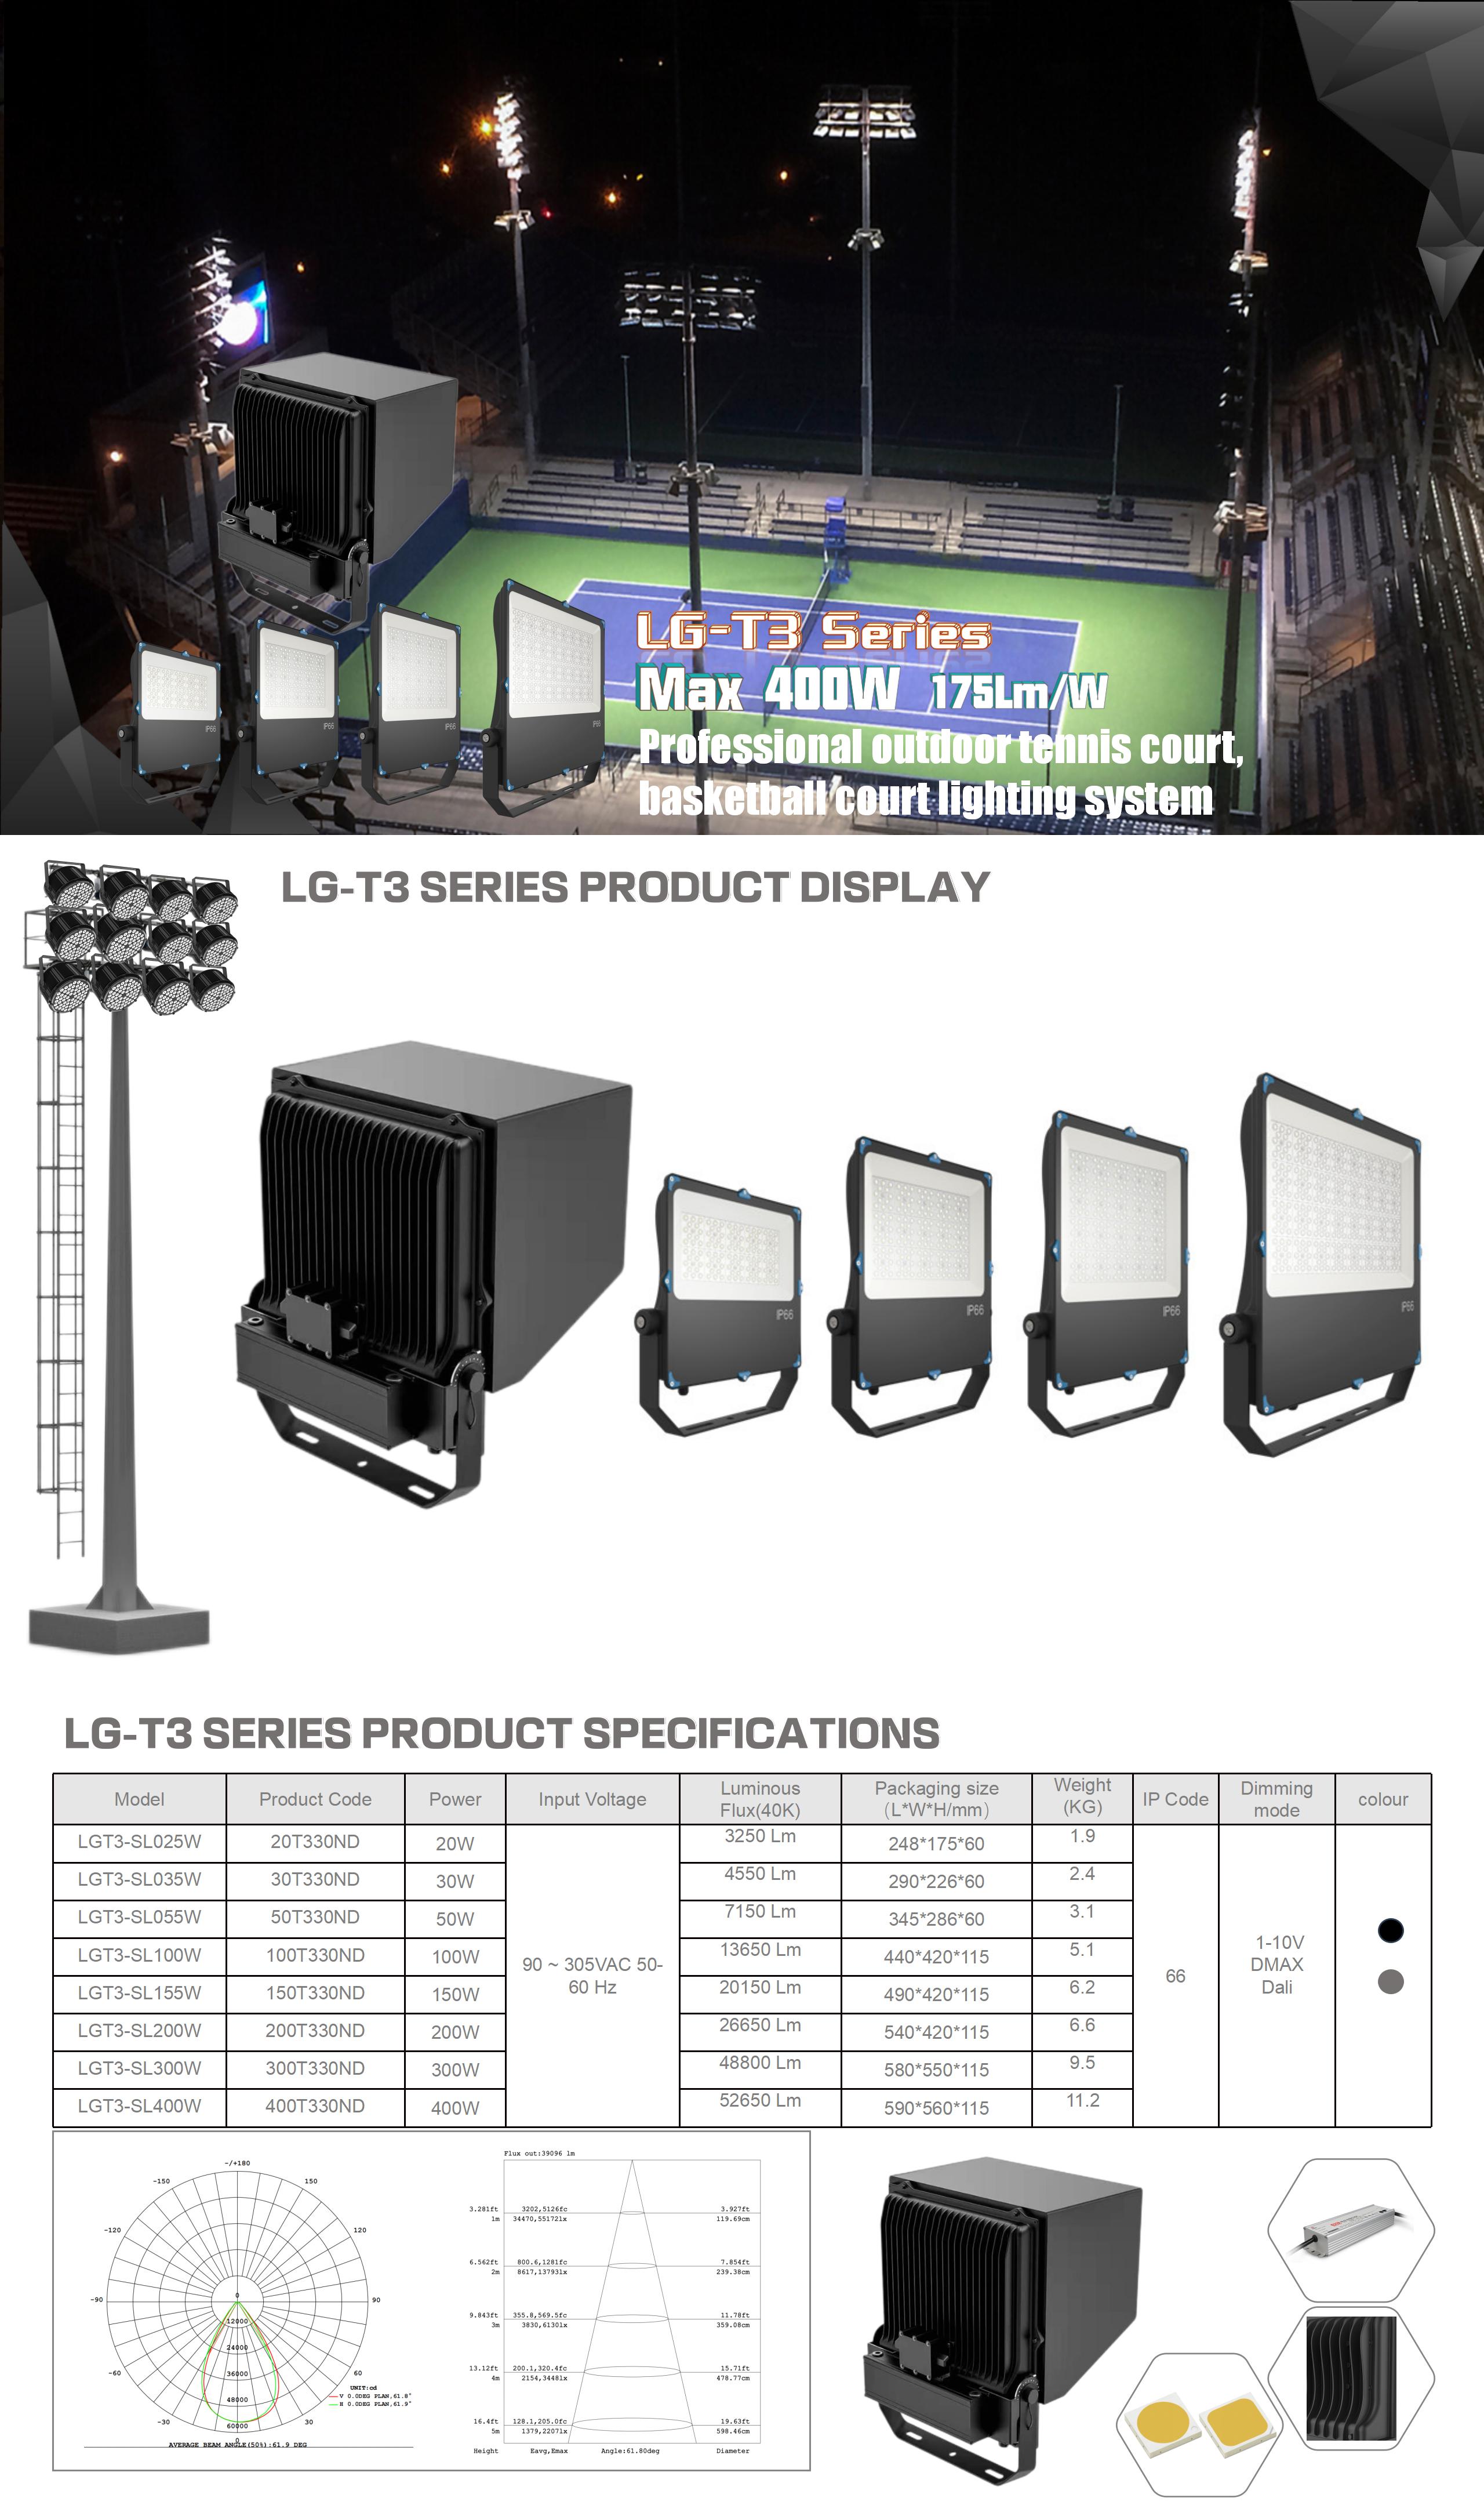 TS series multi-point optical stadium lights (CREE SMD LED) LG-TS100W-SYN/Y(N:Non-dimming control Y: